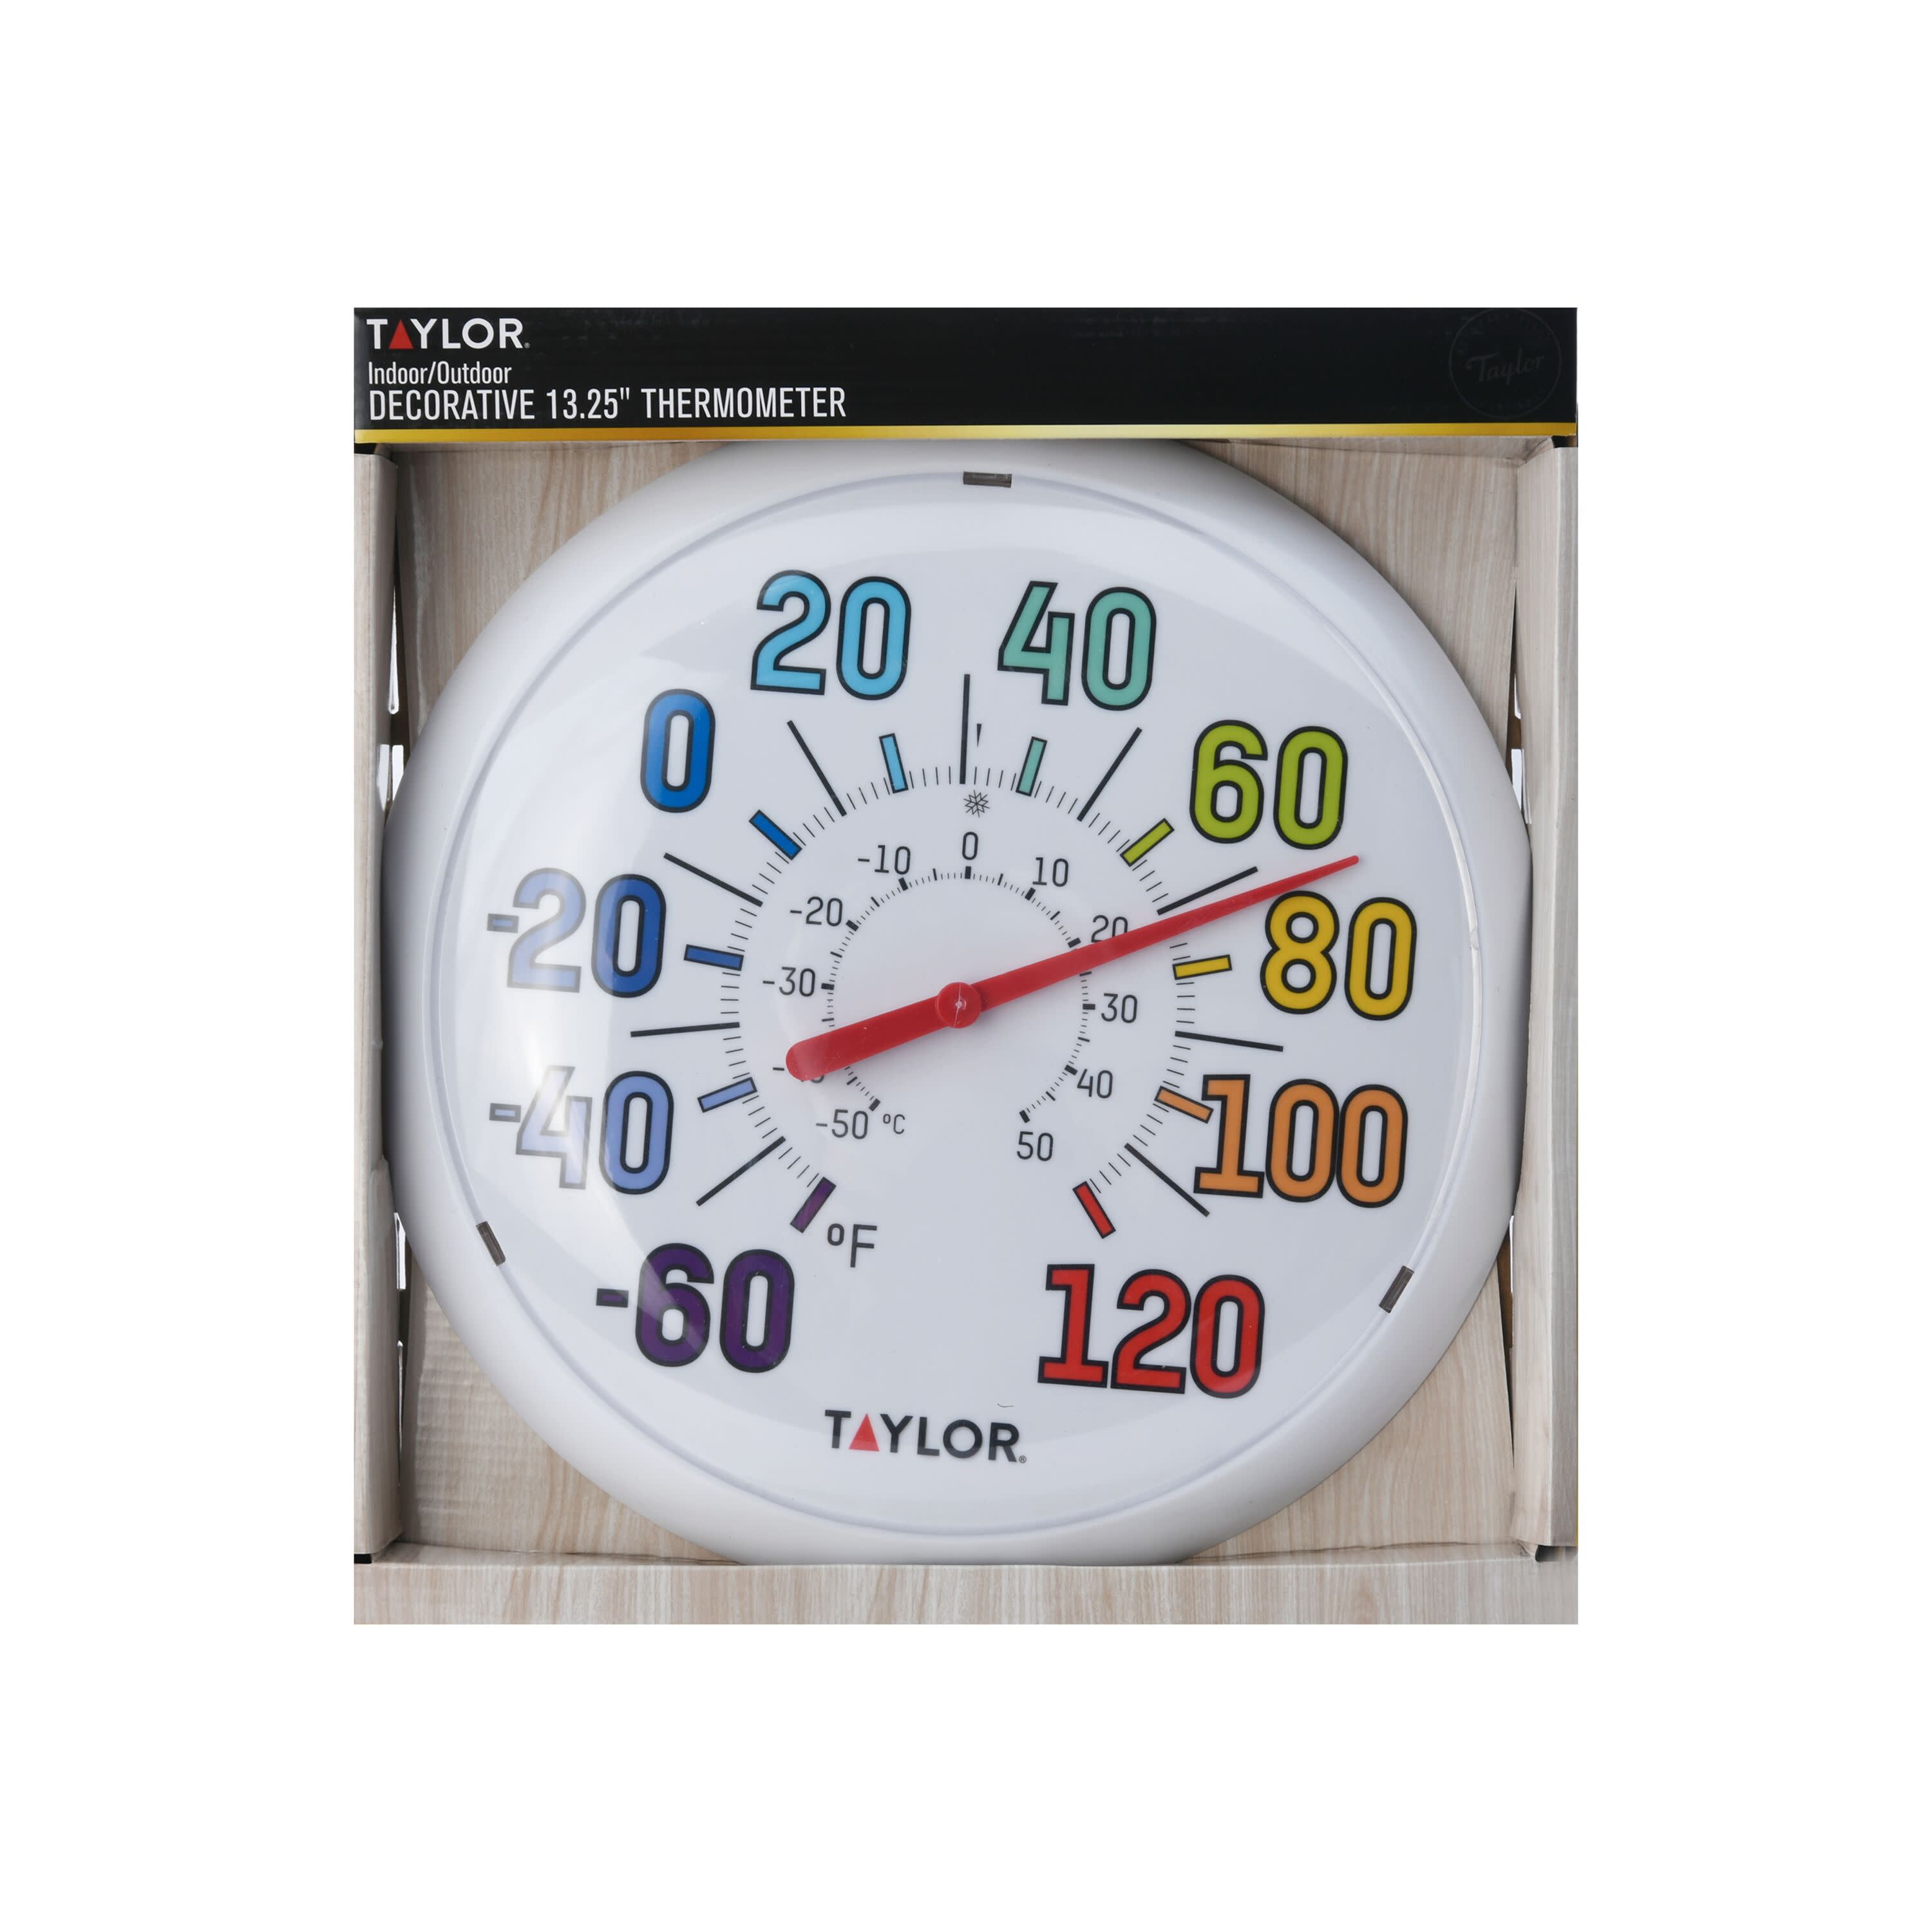 PA-8390) Indoor/Outdoor Dial Thermometer, Large 13.25” Highly Visible